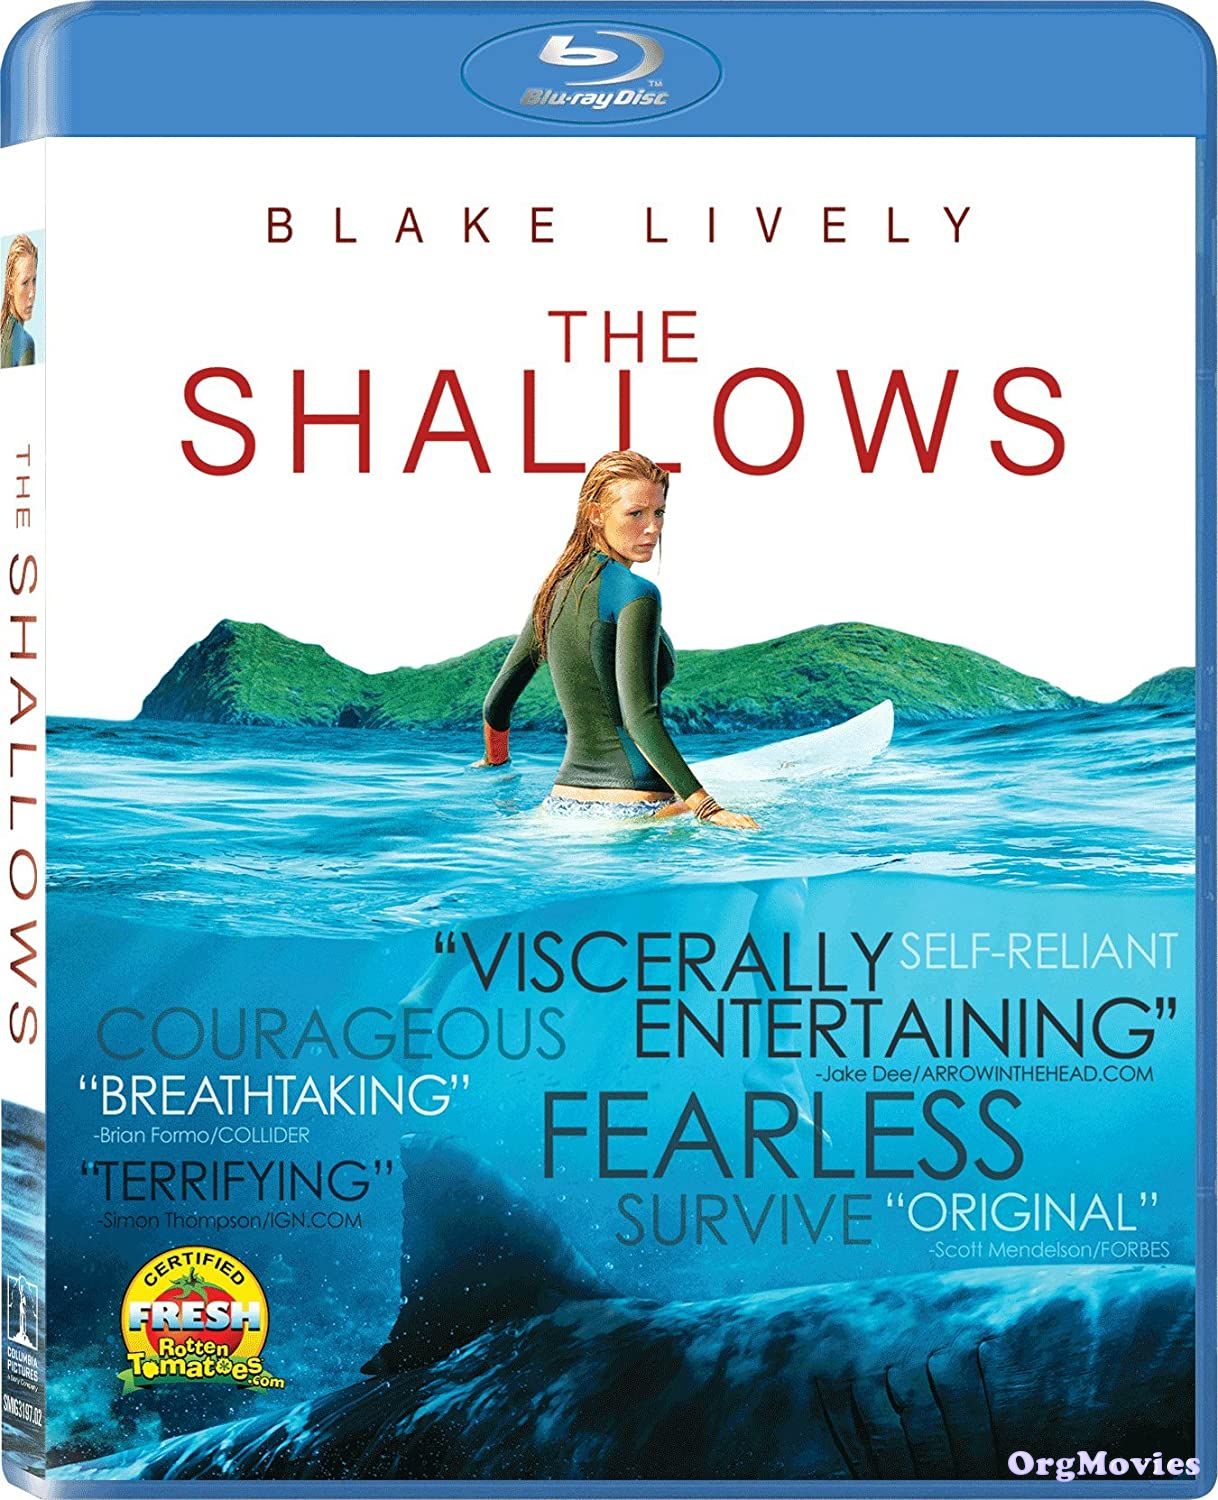 The Shallows 2016 Hindi Dubbed Full Movie download full movie